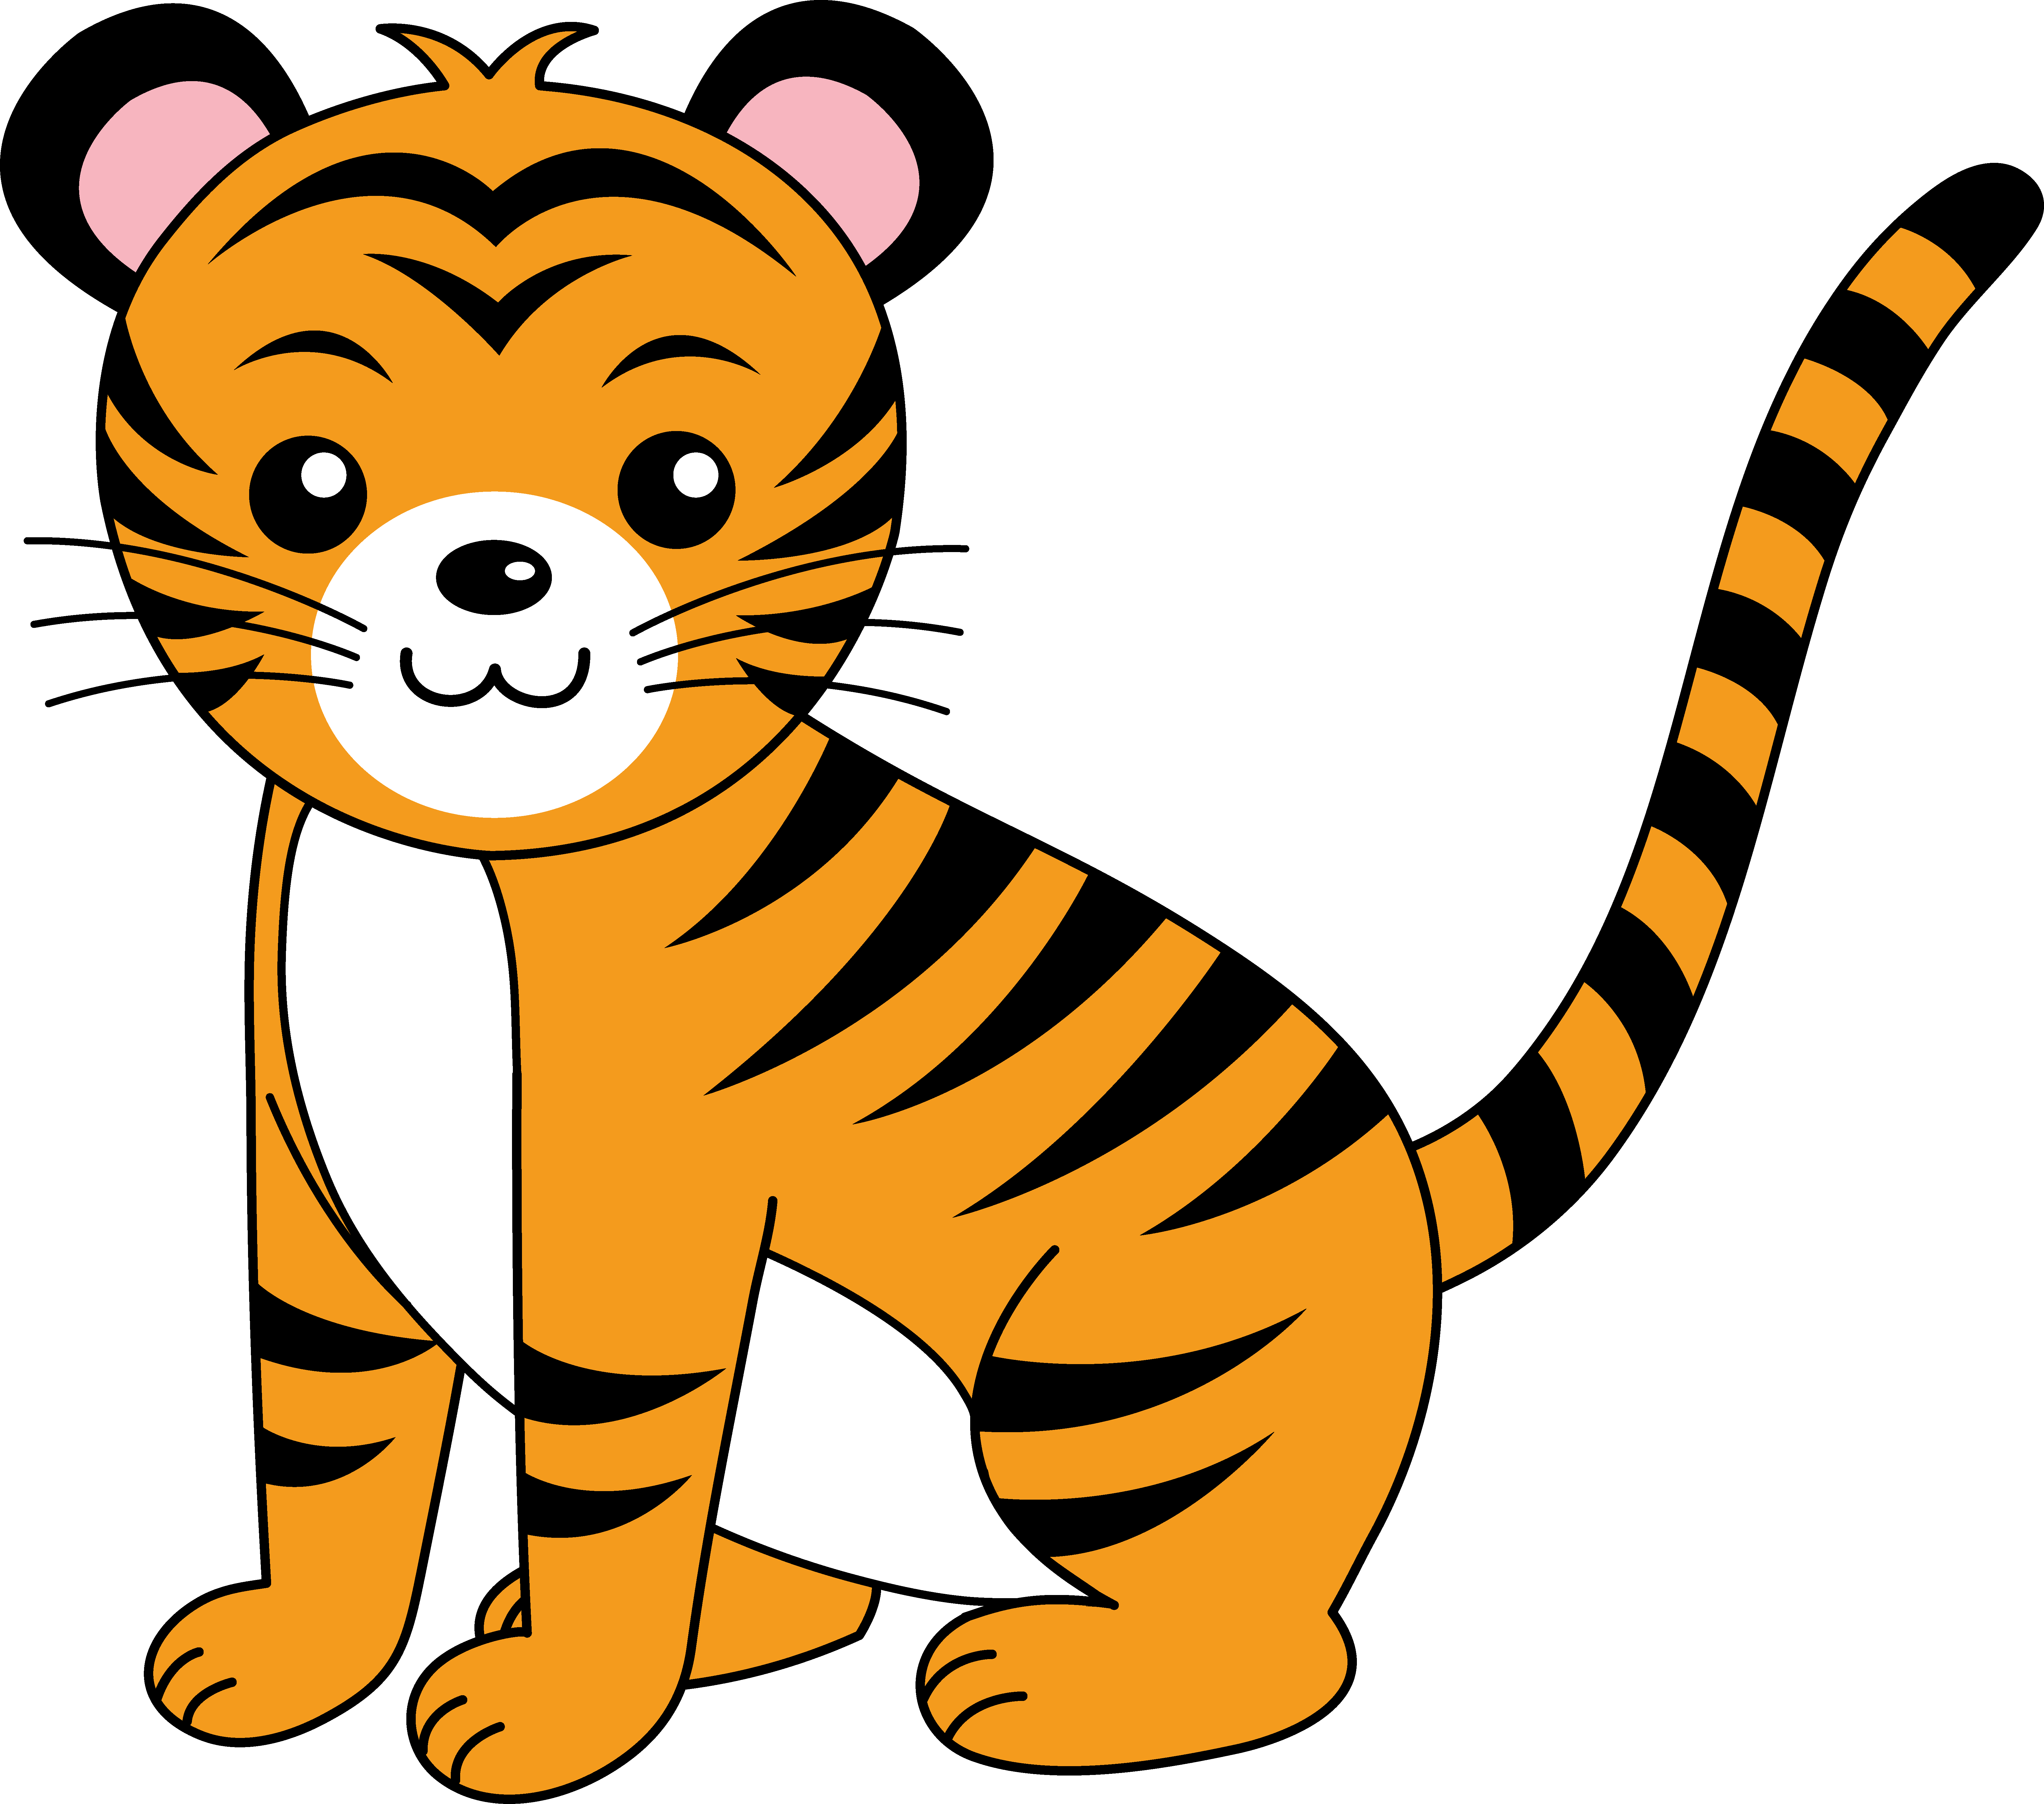 Zoo animals clipart free.